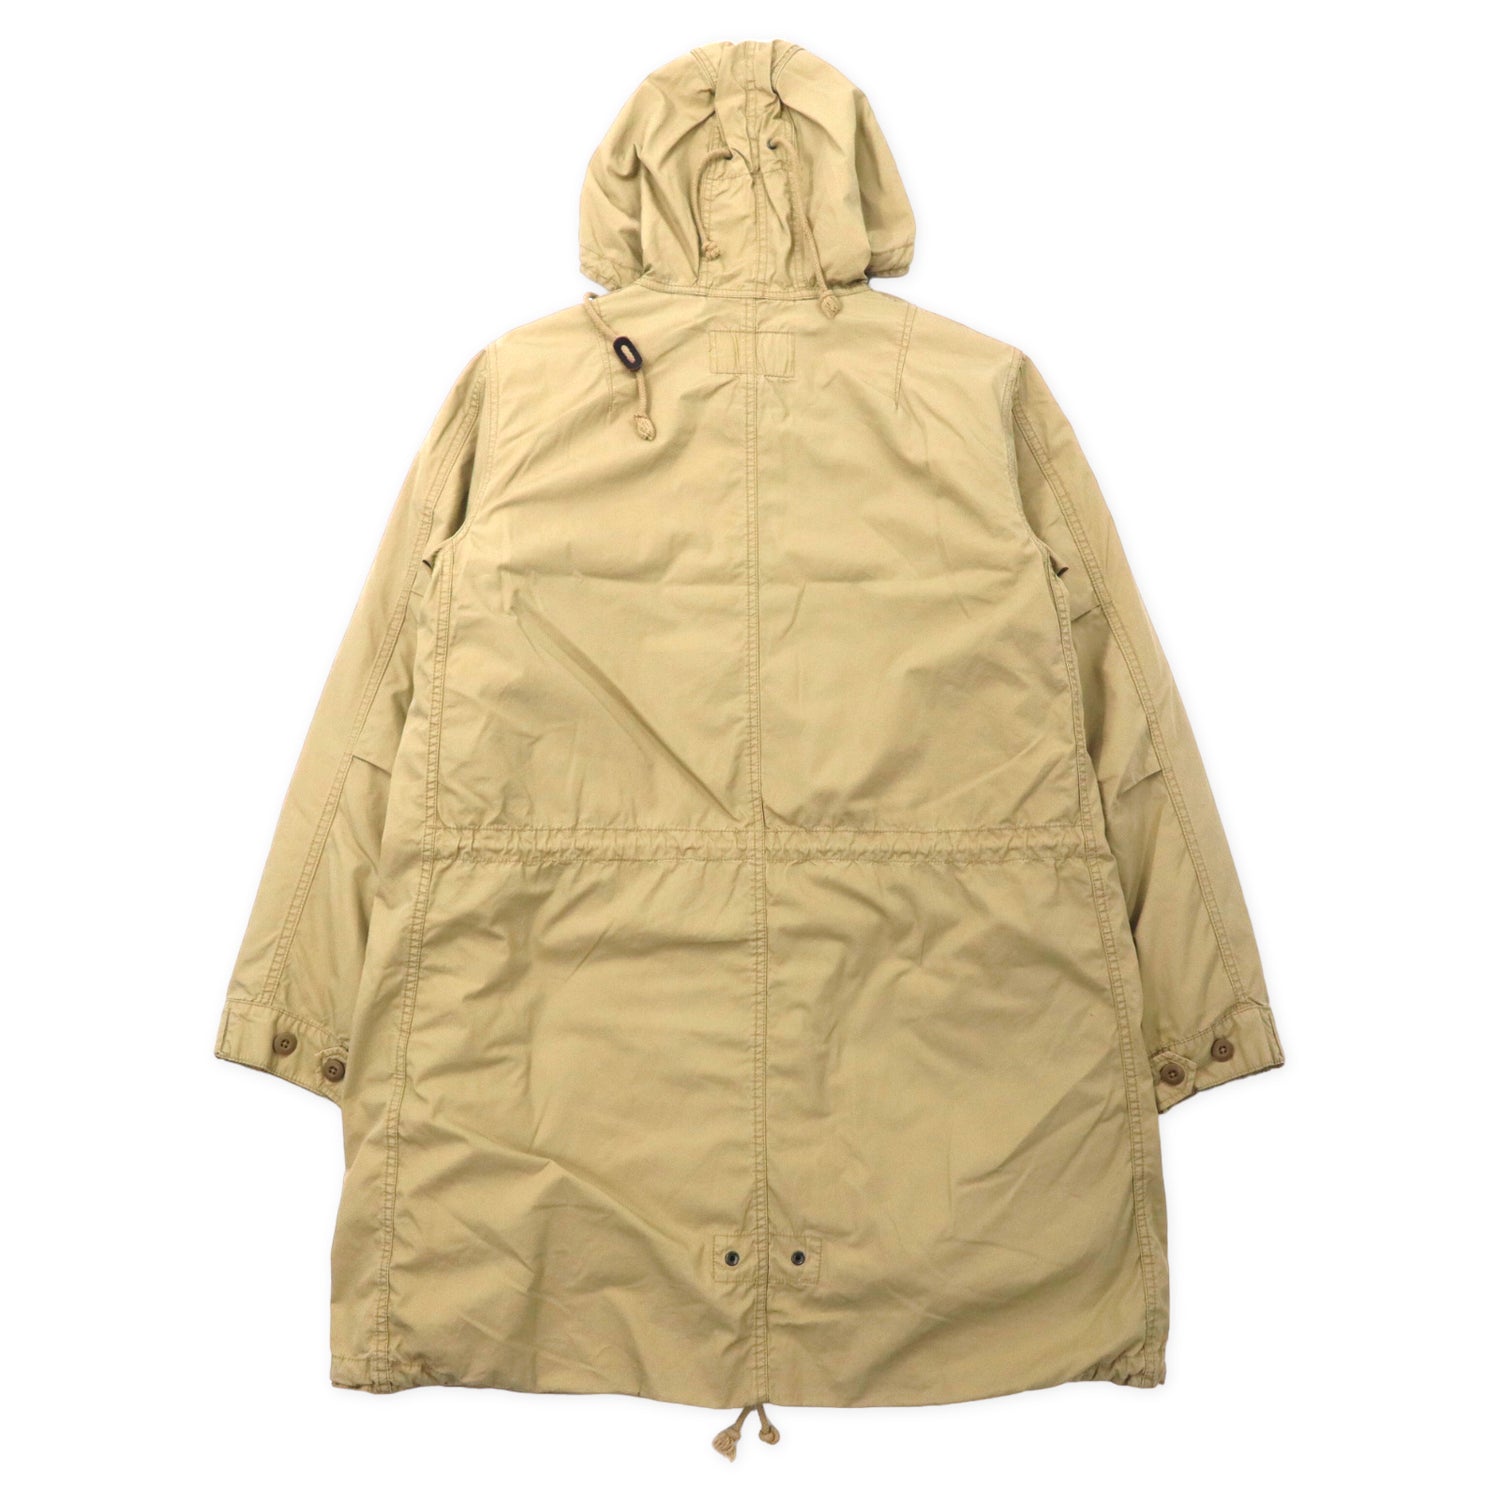 AVIREX M-51 MOD PARKA L Beige Cotton Military Quilted Liner 